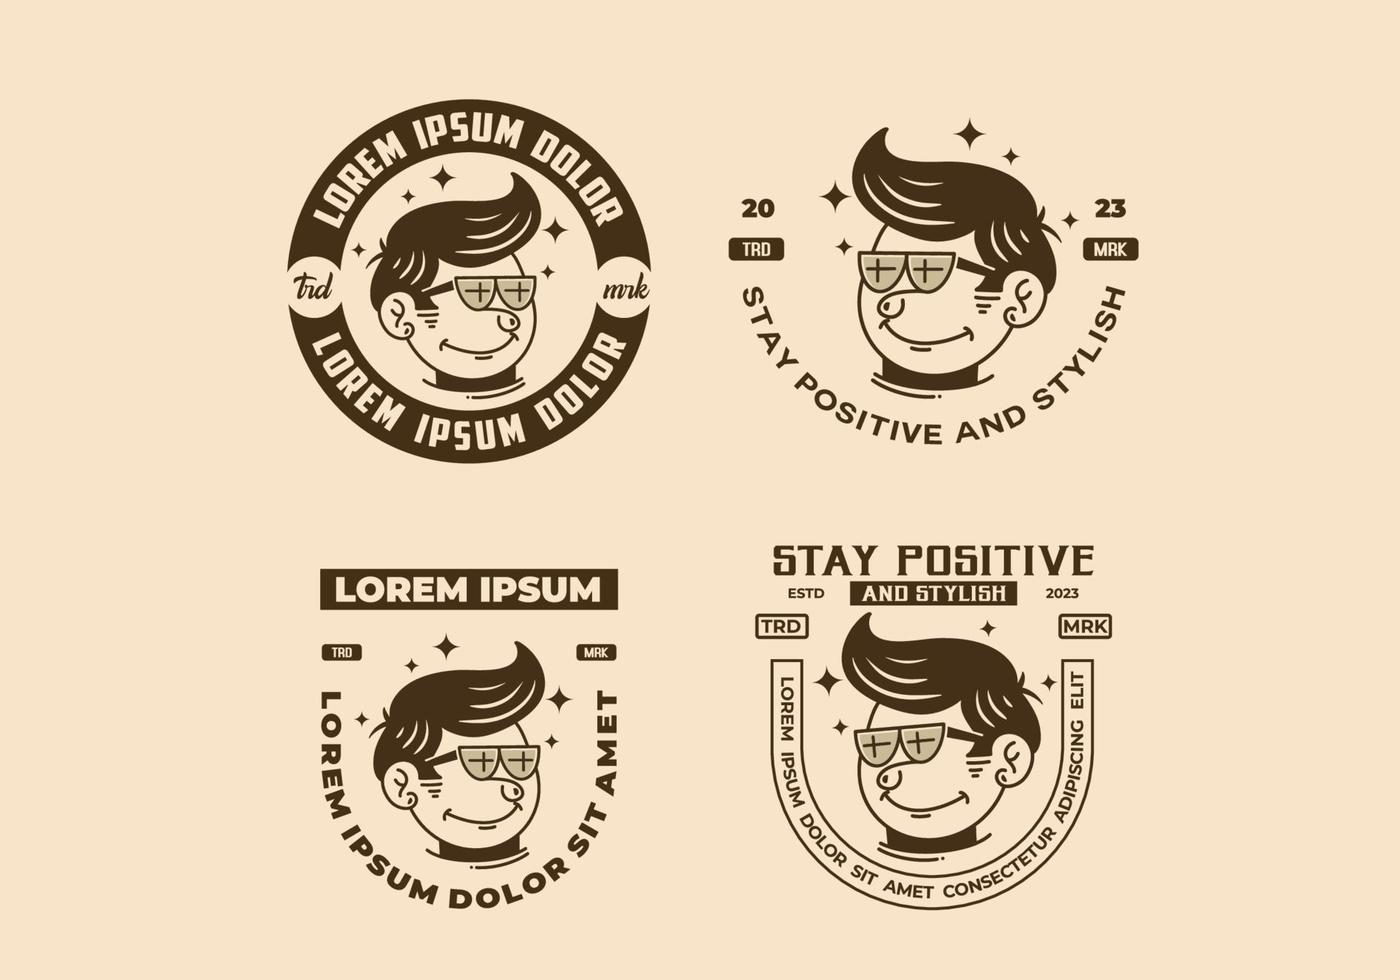 Illustration of a funny face man with retro hair wearing glasses vector